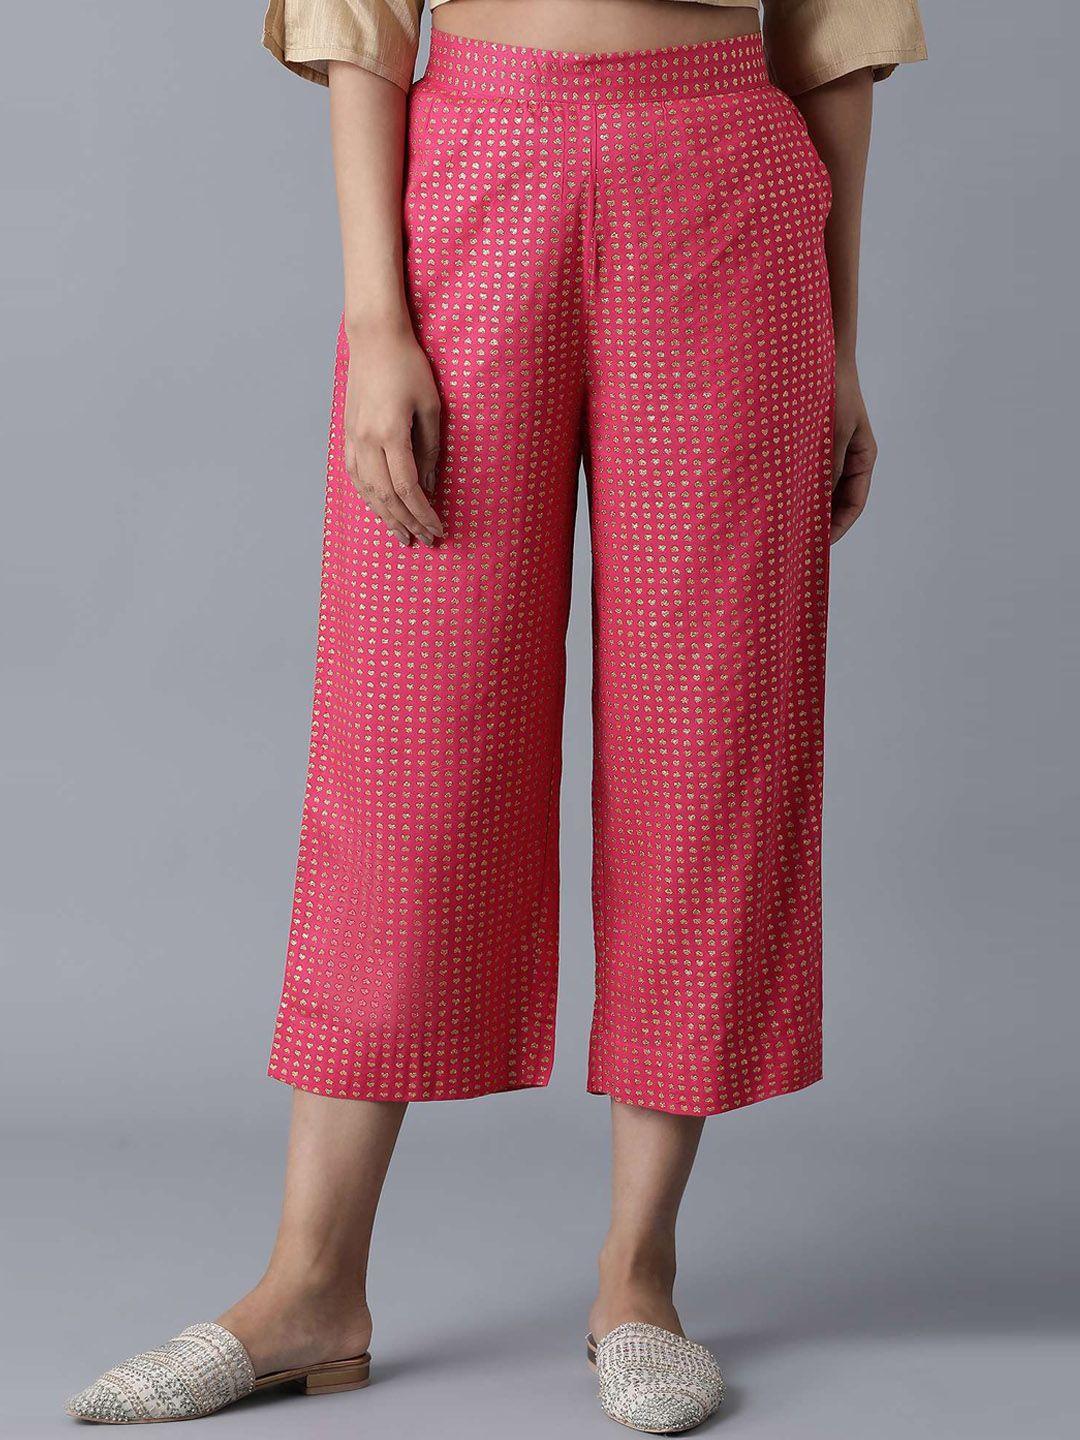 elleven women red & gold printed culottes trousers